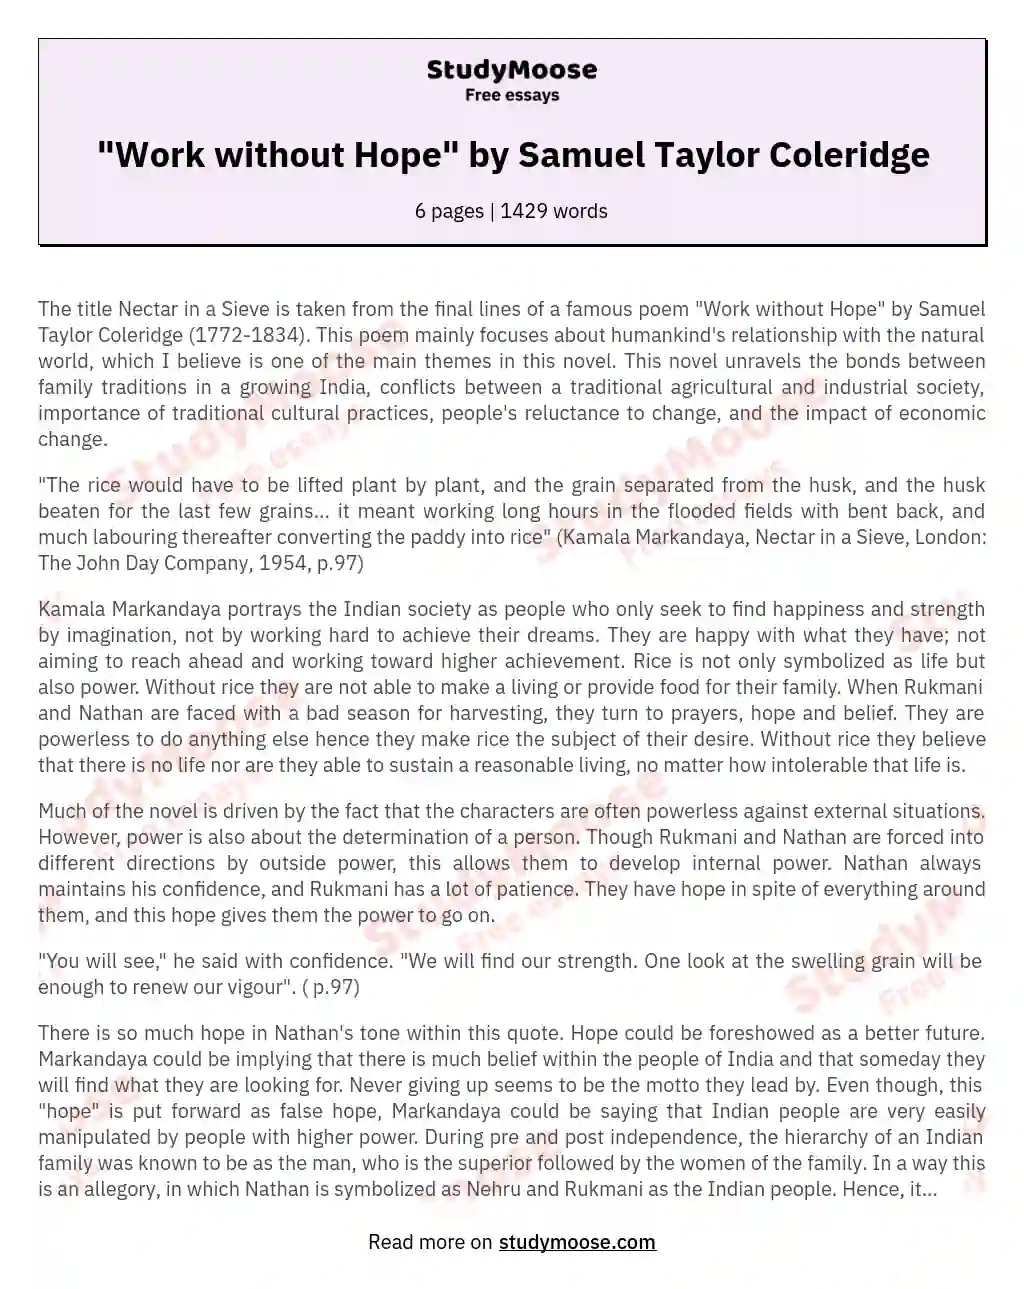 "Work without Hope" by Samuel Taylor Coleridge essay